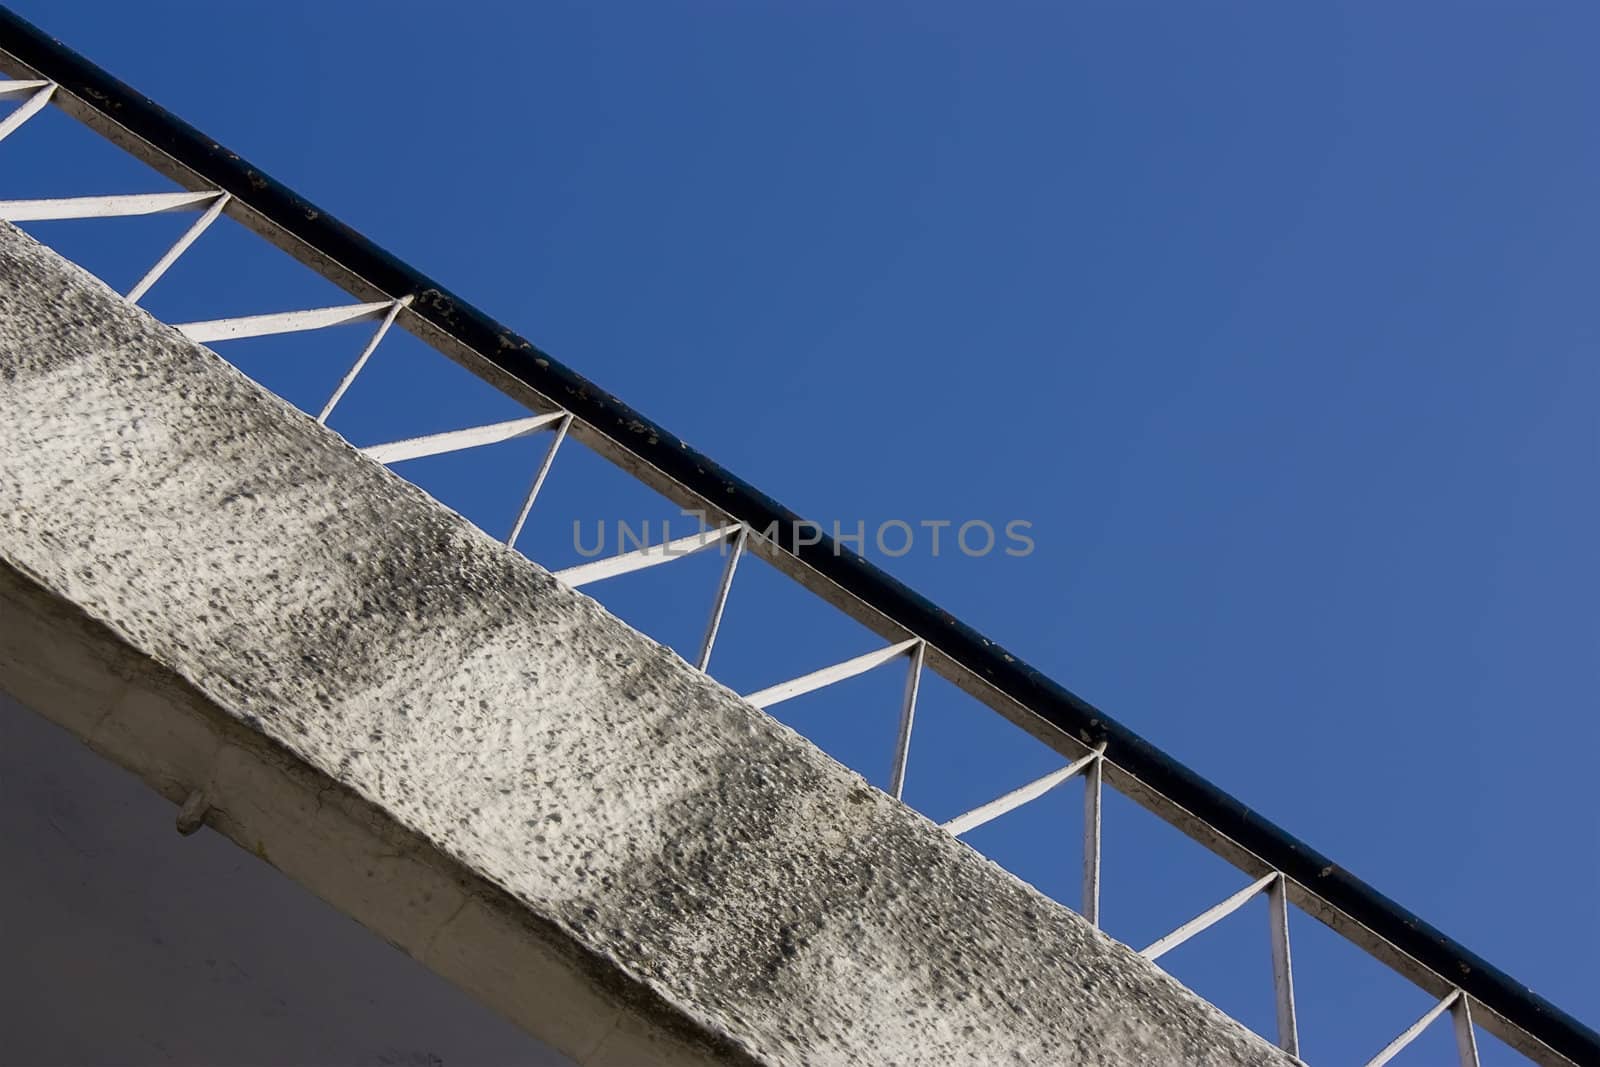 The balcony of a old roof under the blue sky